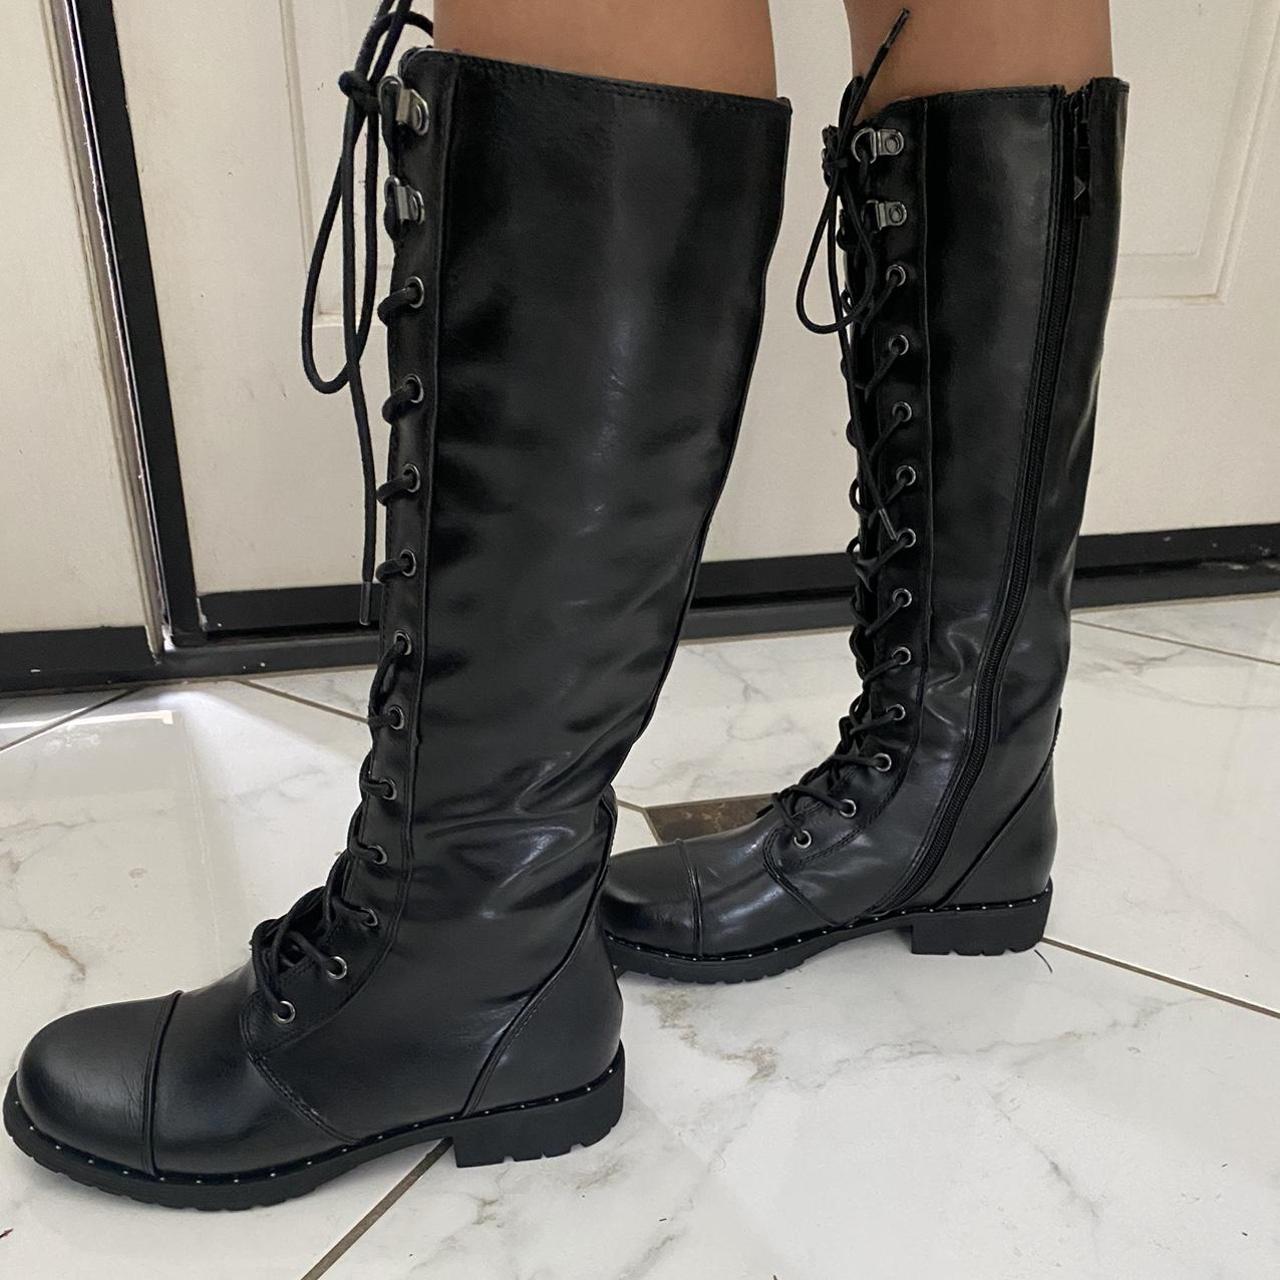 Dirty Laundry Women's Black Boots (4)